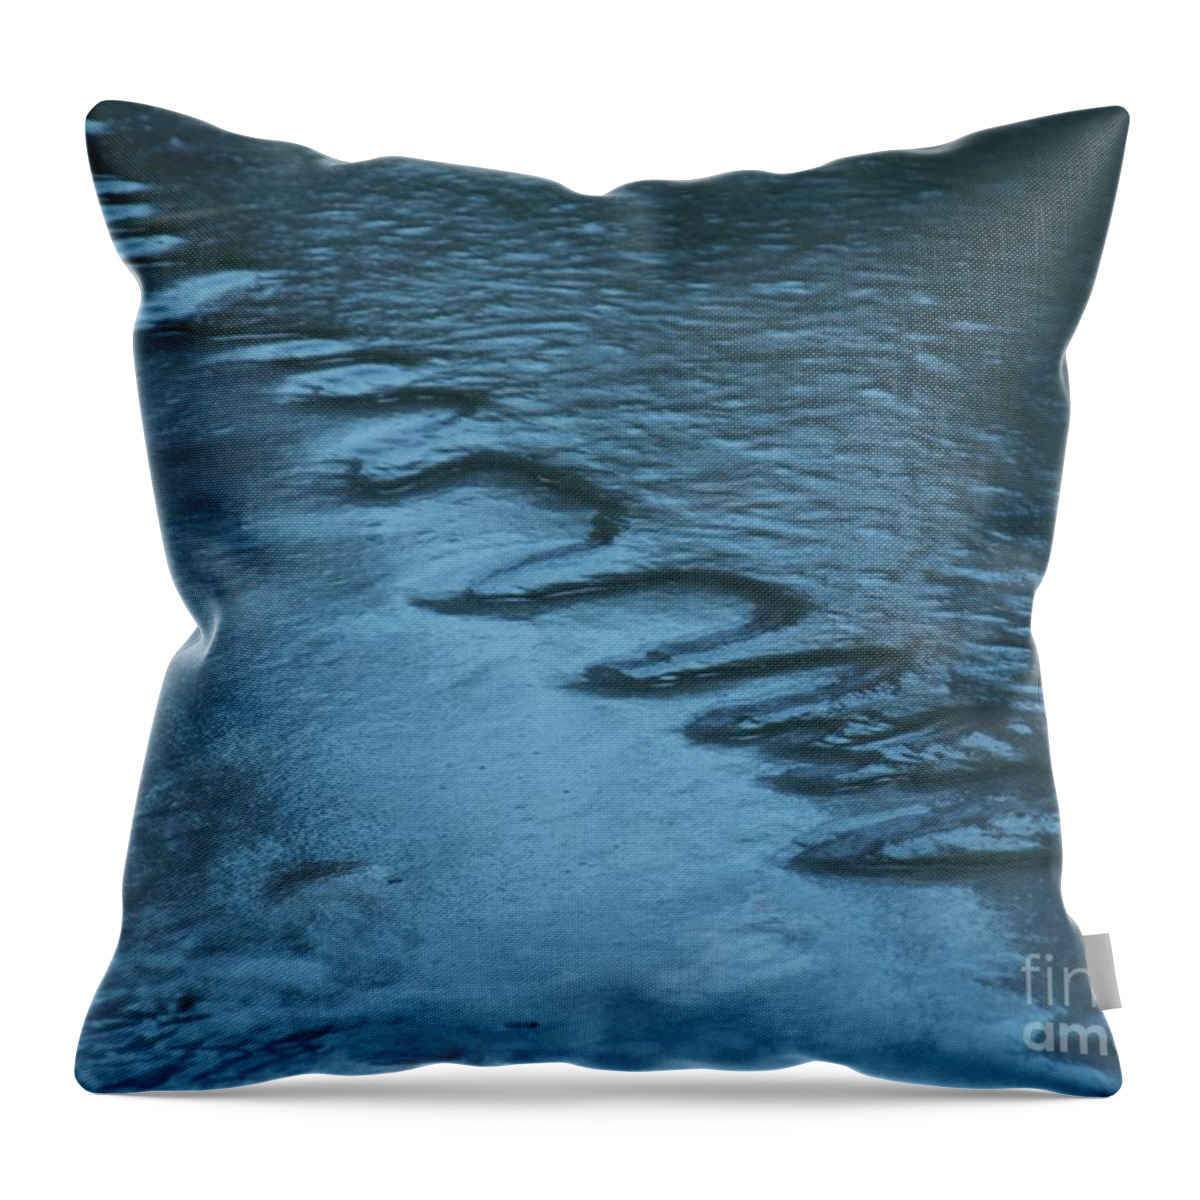  Throw Pillow featuring the photograph Winter Chatham Pond by Mary Kobet